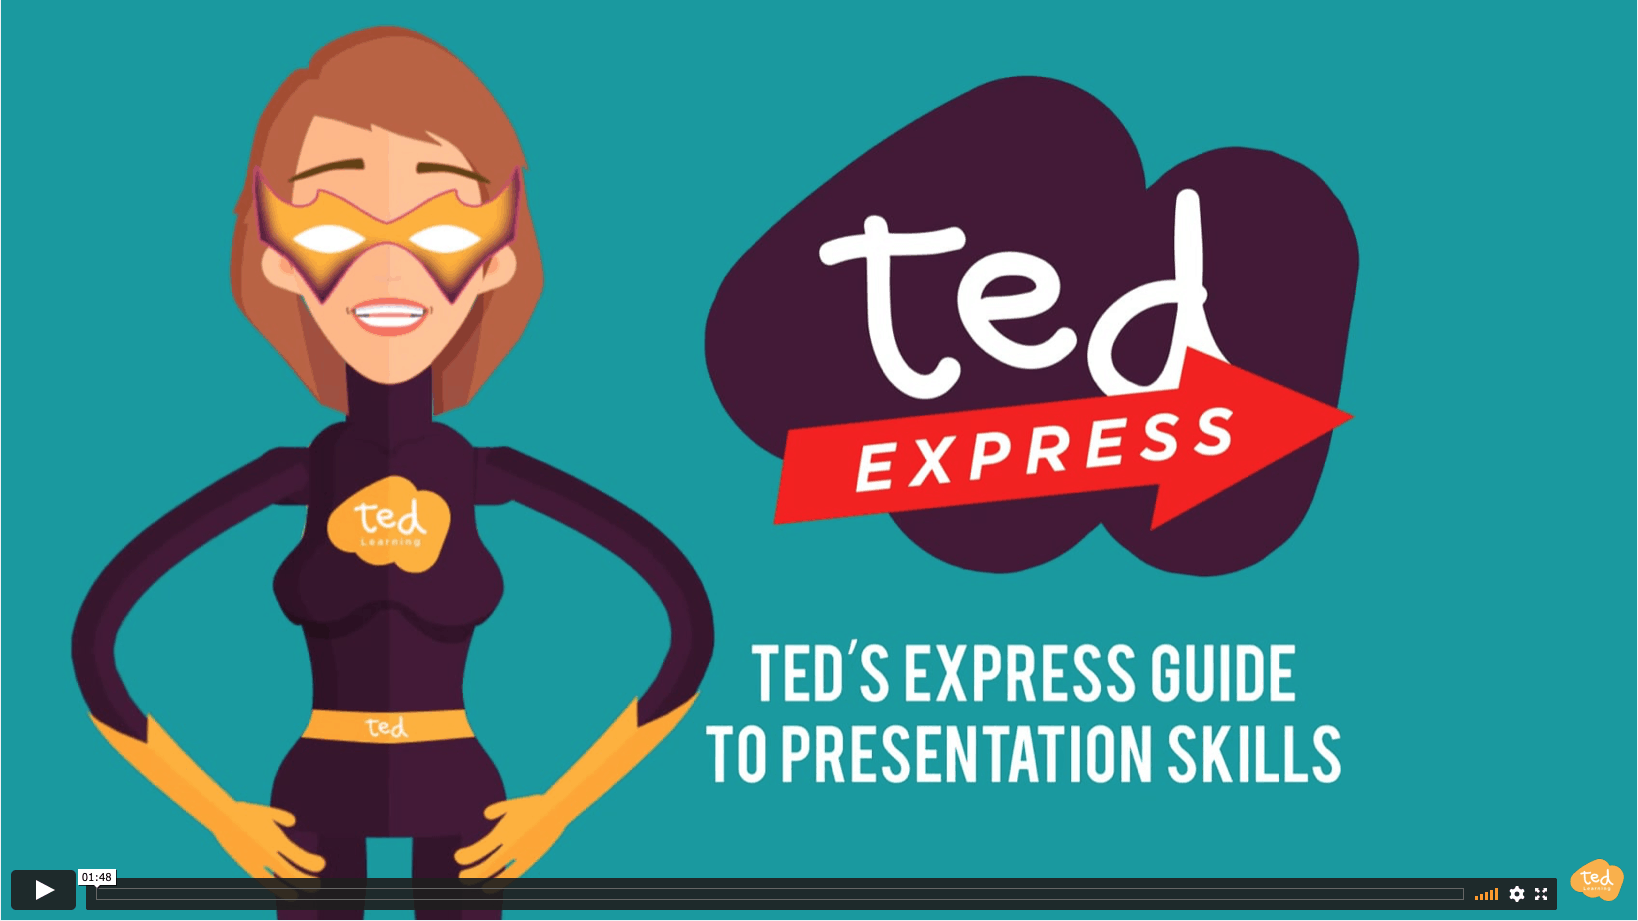 TED EXPRESS GUIDE TO PRESENTATION SKILLS